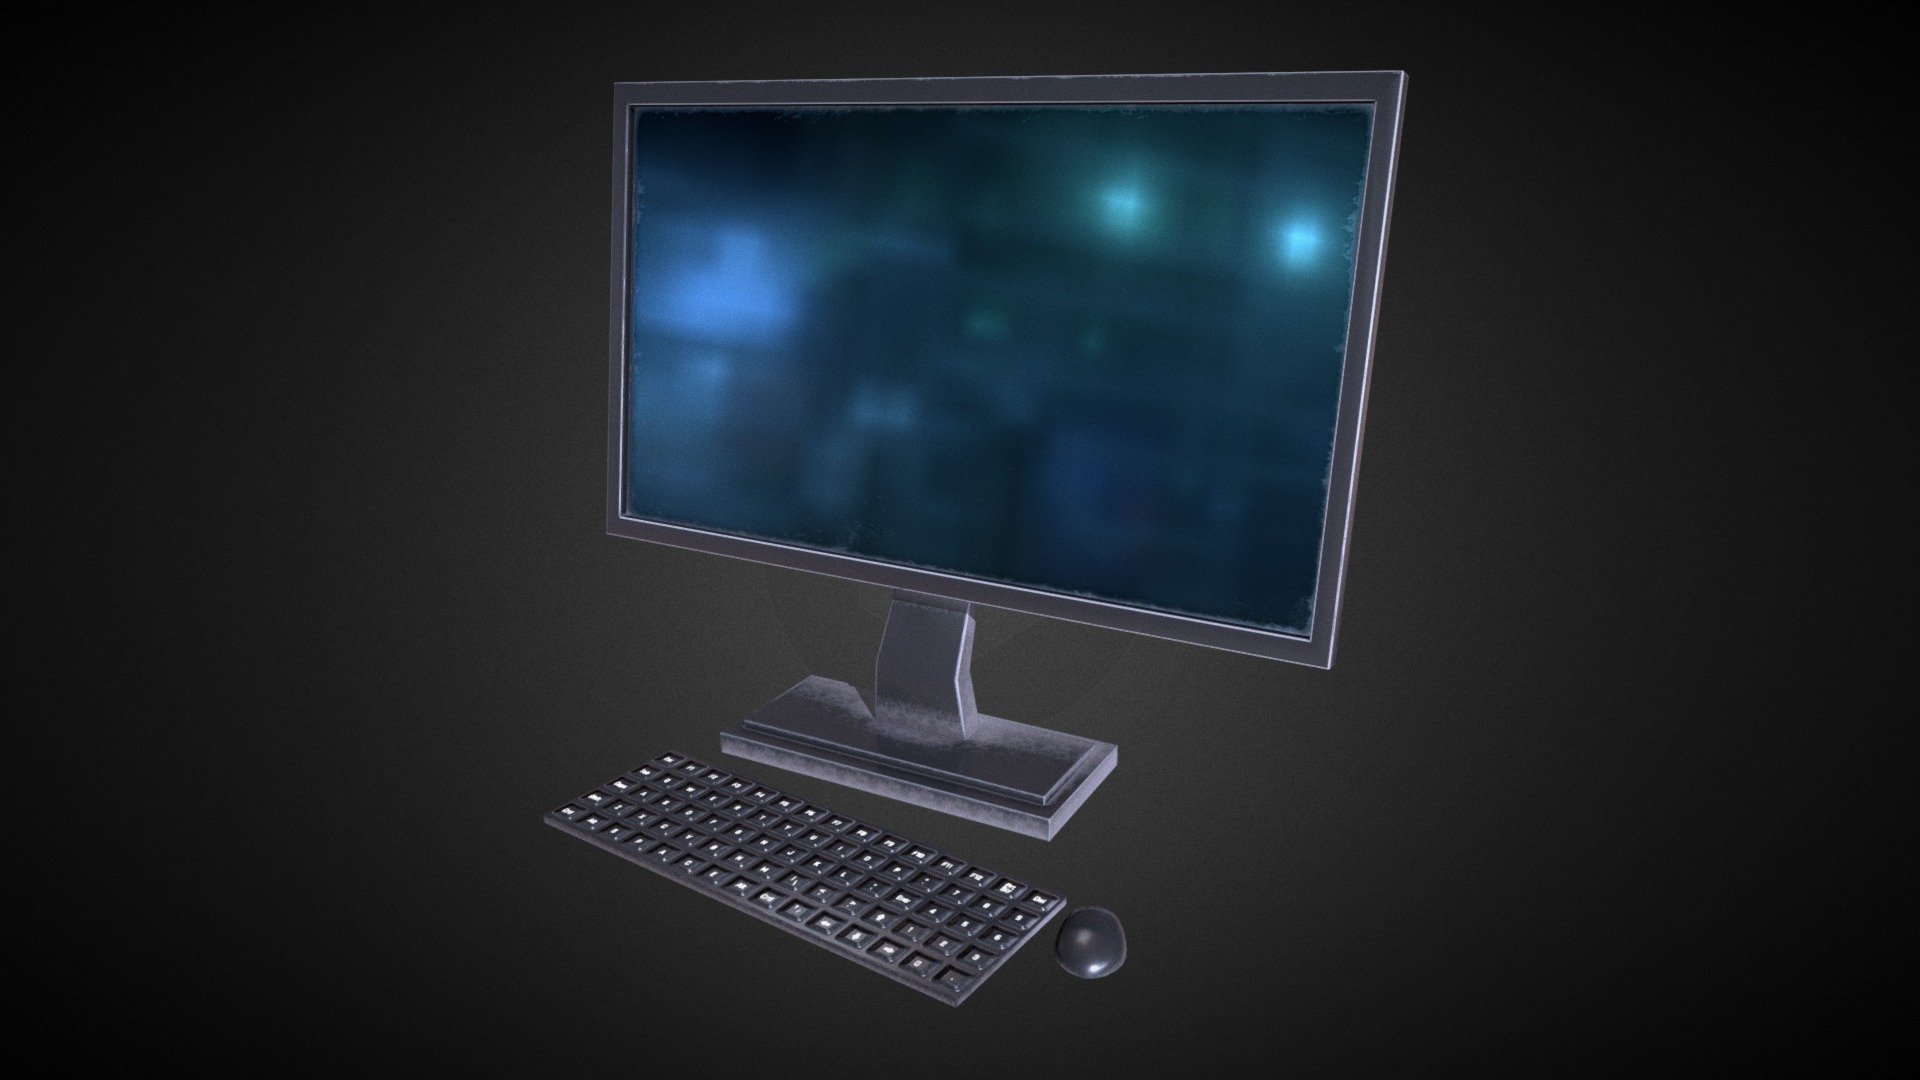 Desktop Computer - Low Poly Model

-Desktop Computer - Low Poly is Modeled in Blender version 2.79b.

-Render Engine used: Blender Cycles version 2.79b

-For texturing Substance Painter is used.

-Low Poly model can be use in various scene setups.

-2K Material Textures included.

-.Blend, .Fbx and .Obj/.Mtl files included.

-As per Blender statistics the Desktop Computer - Low Poly have (Verts:597 Faces:569 Tris:1062) - Desktop Computer - Low Poly - 3D model by CG Buzz (@Tapan_S) 3d model